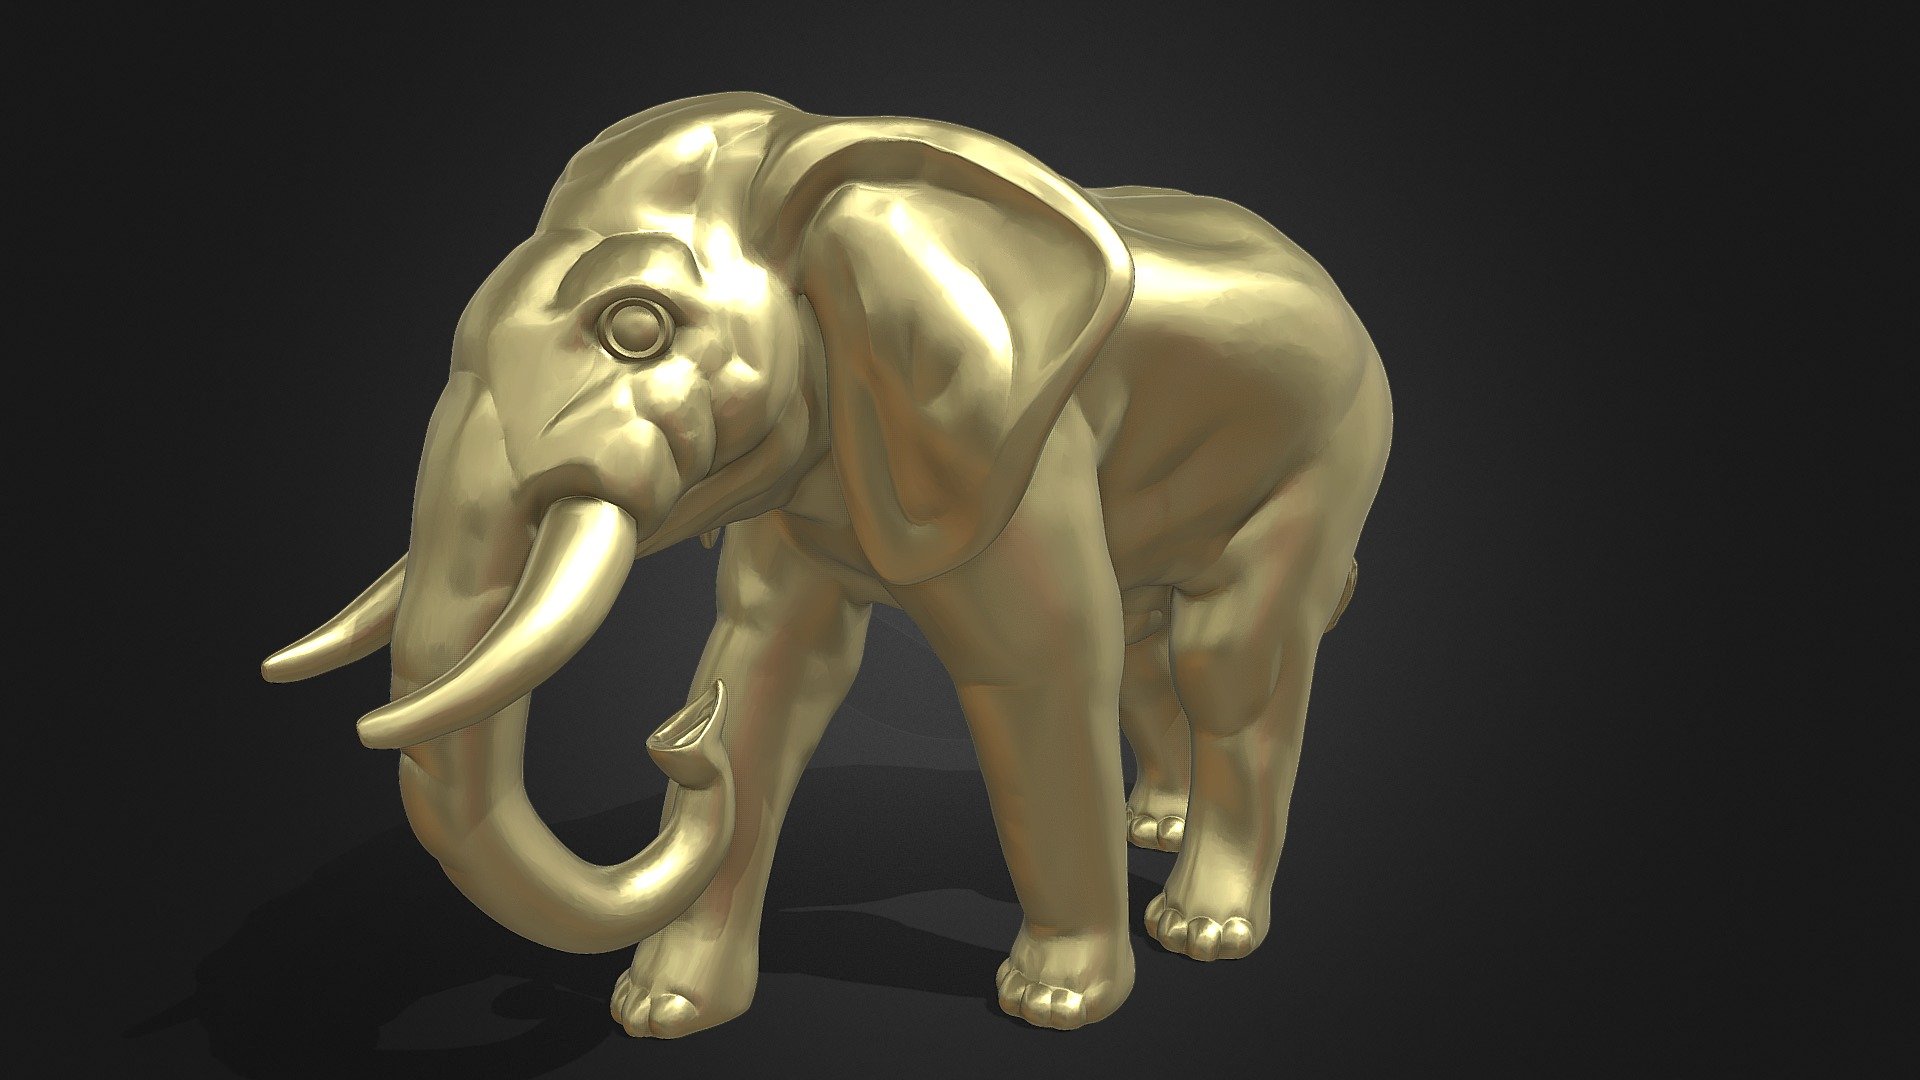 Realistic Animal with high resolution polygonal with gold material and Clear black background make it realistic and so cute.

Recomended For:


Basic modeling 
Rigging 
Sculpting 
Become Statue
Decorate
3D Print File
Toy
visualization

Have fun  :) - Gold asian elephant cute eye pose - Buy Royalty Free 3D model by Puppy3D 3d model